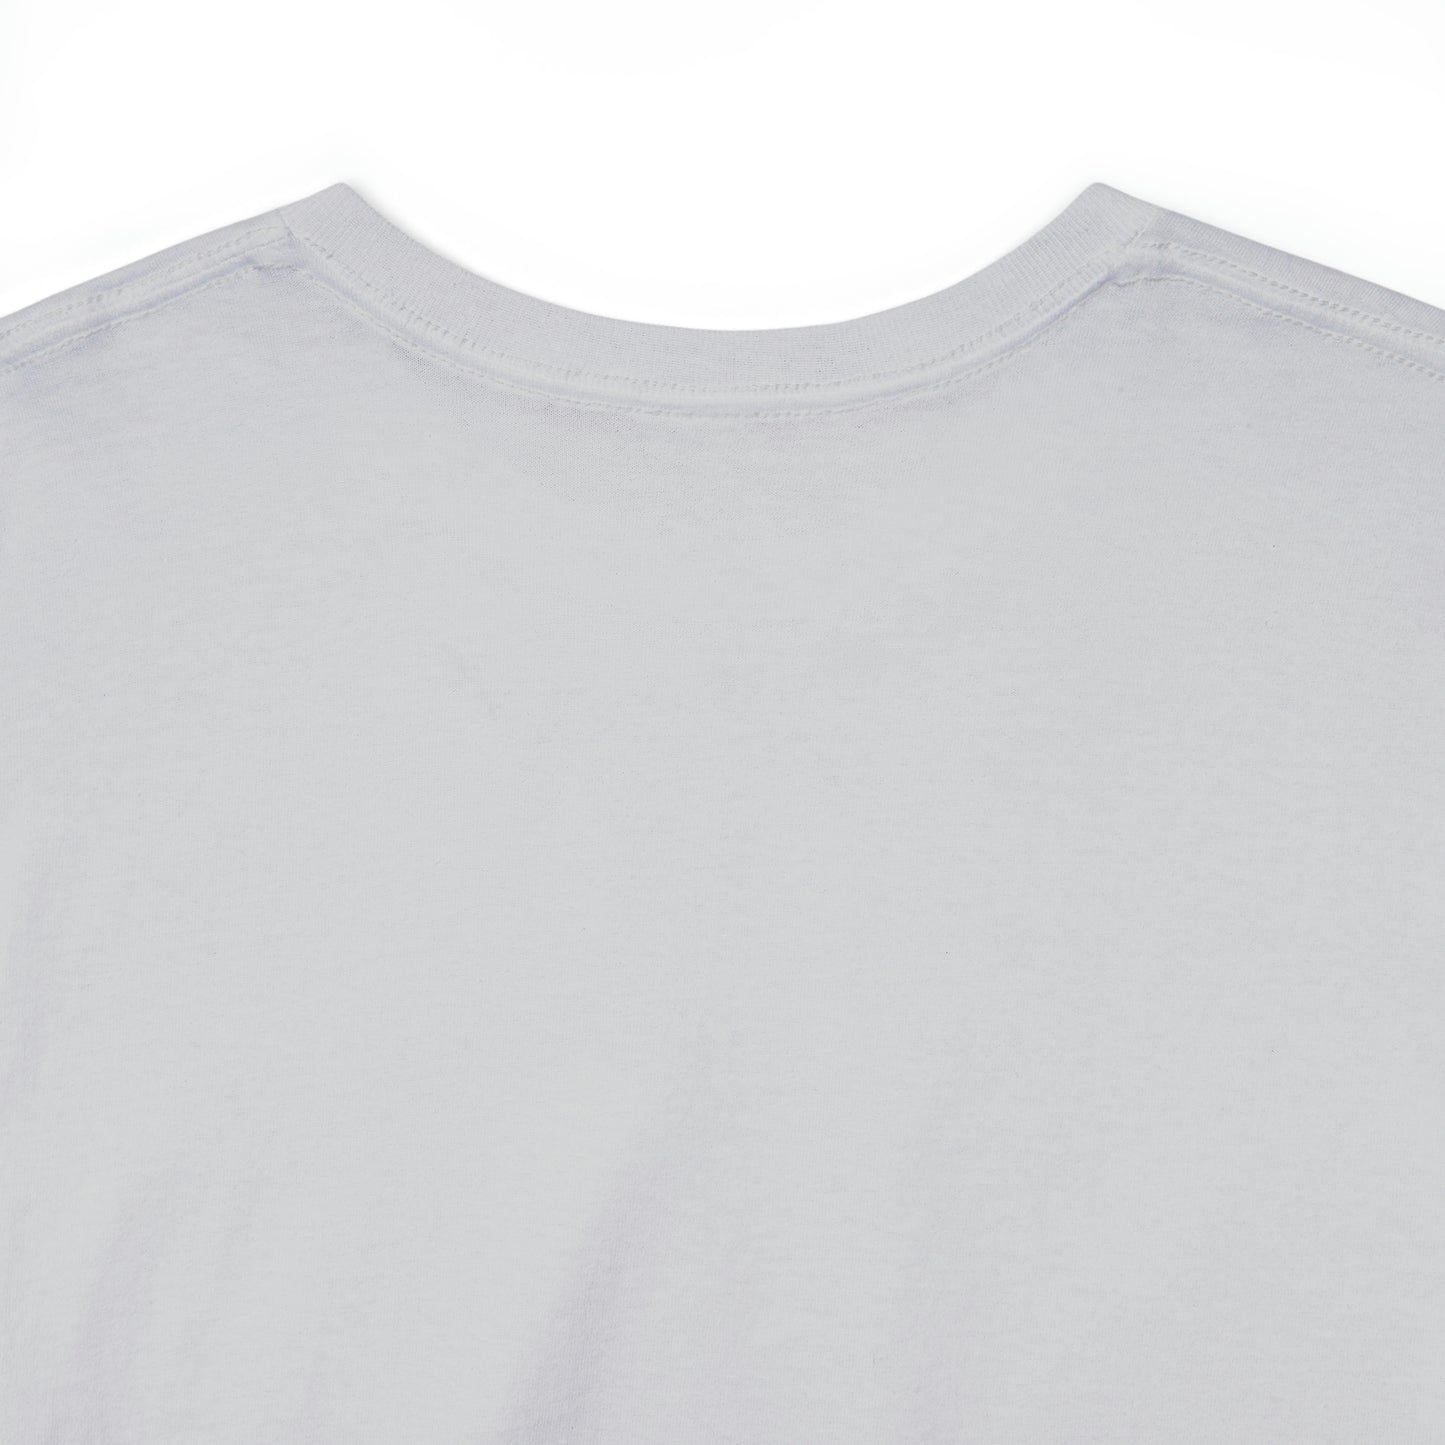 Woodworkers Source Heavy Cotton Tee - Left Chest Logo